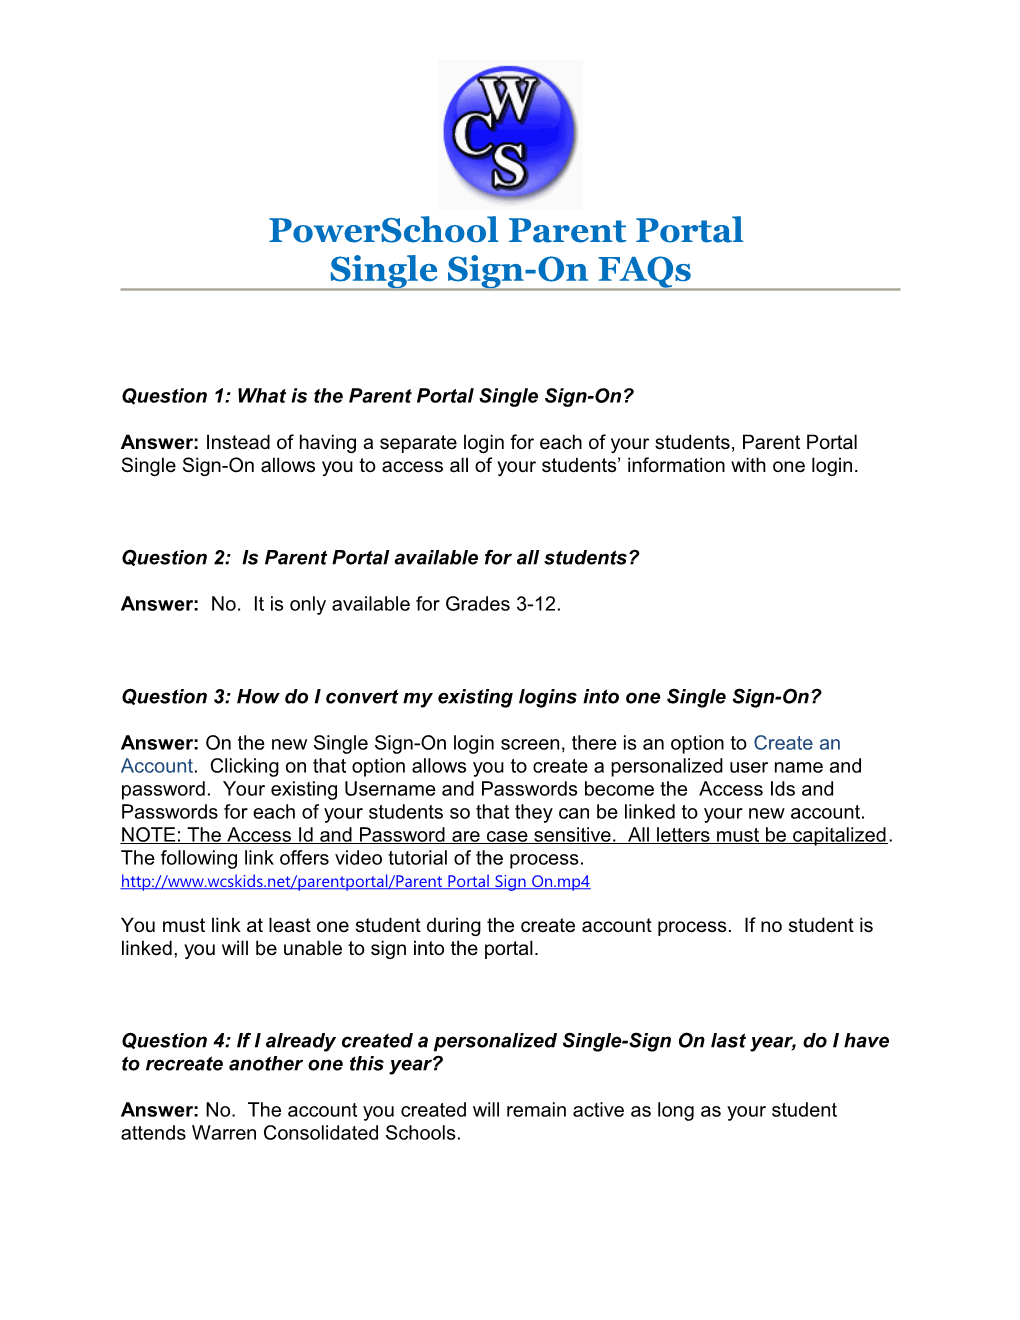 Question 1: What Is the Parent Portal Single Sign-On?